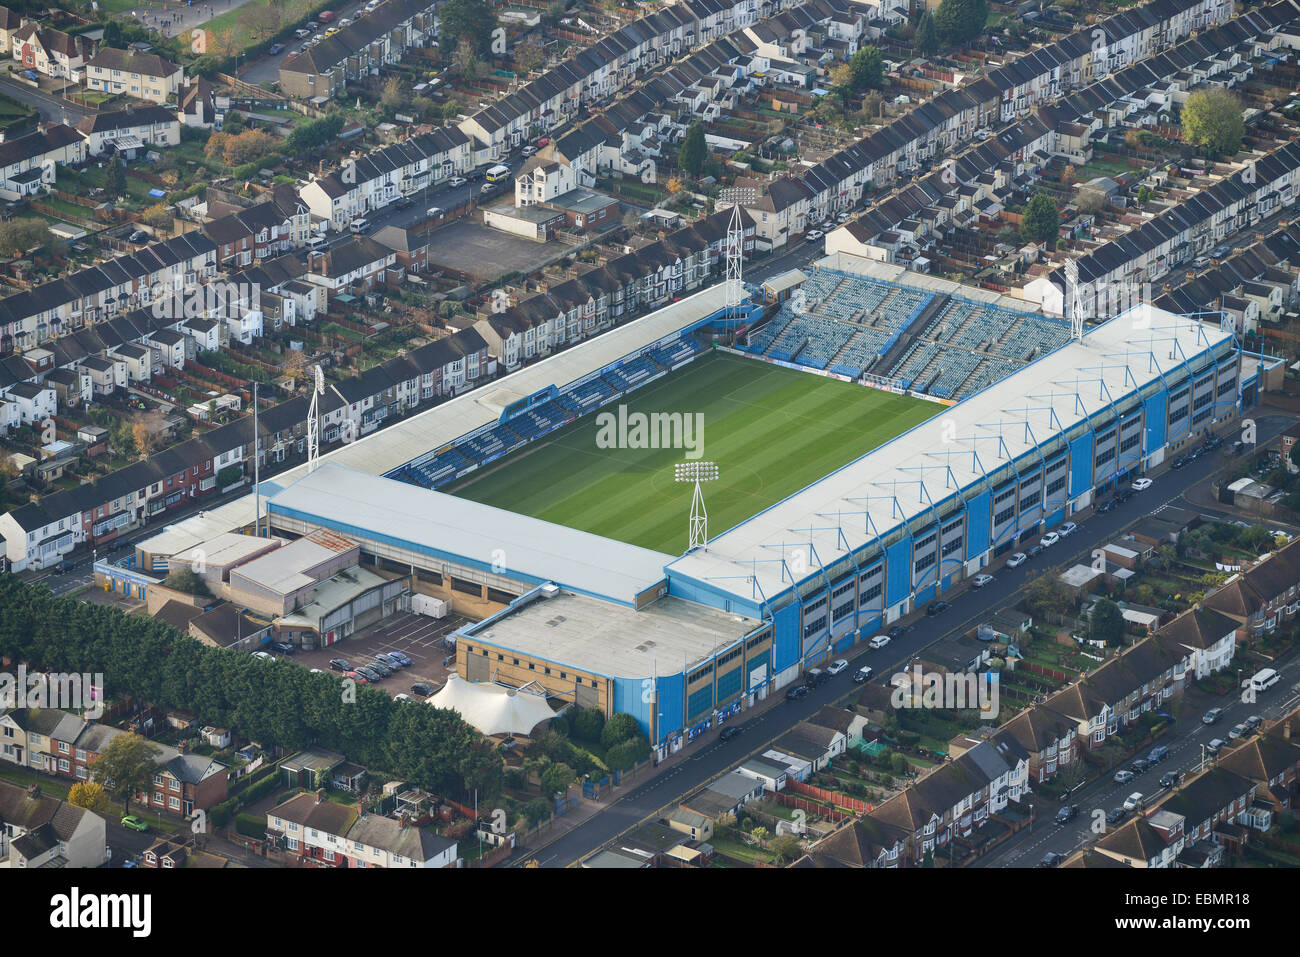 An aerial view of the Priestfield Stadium, home of Gillingham FC Stock Photo